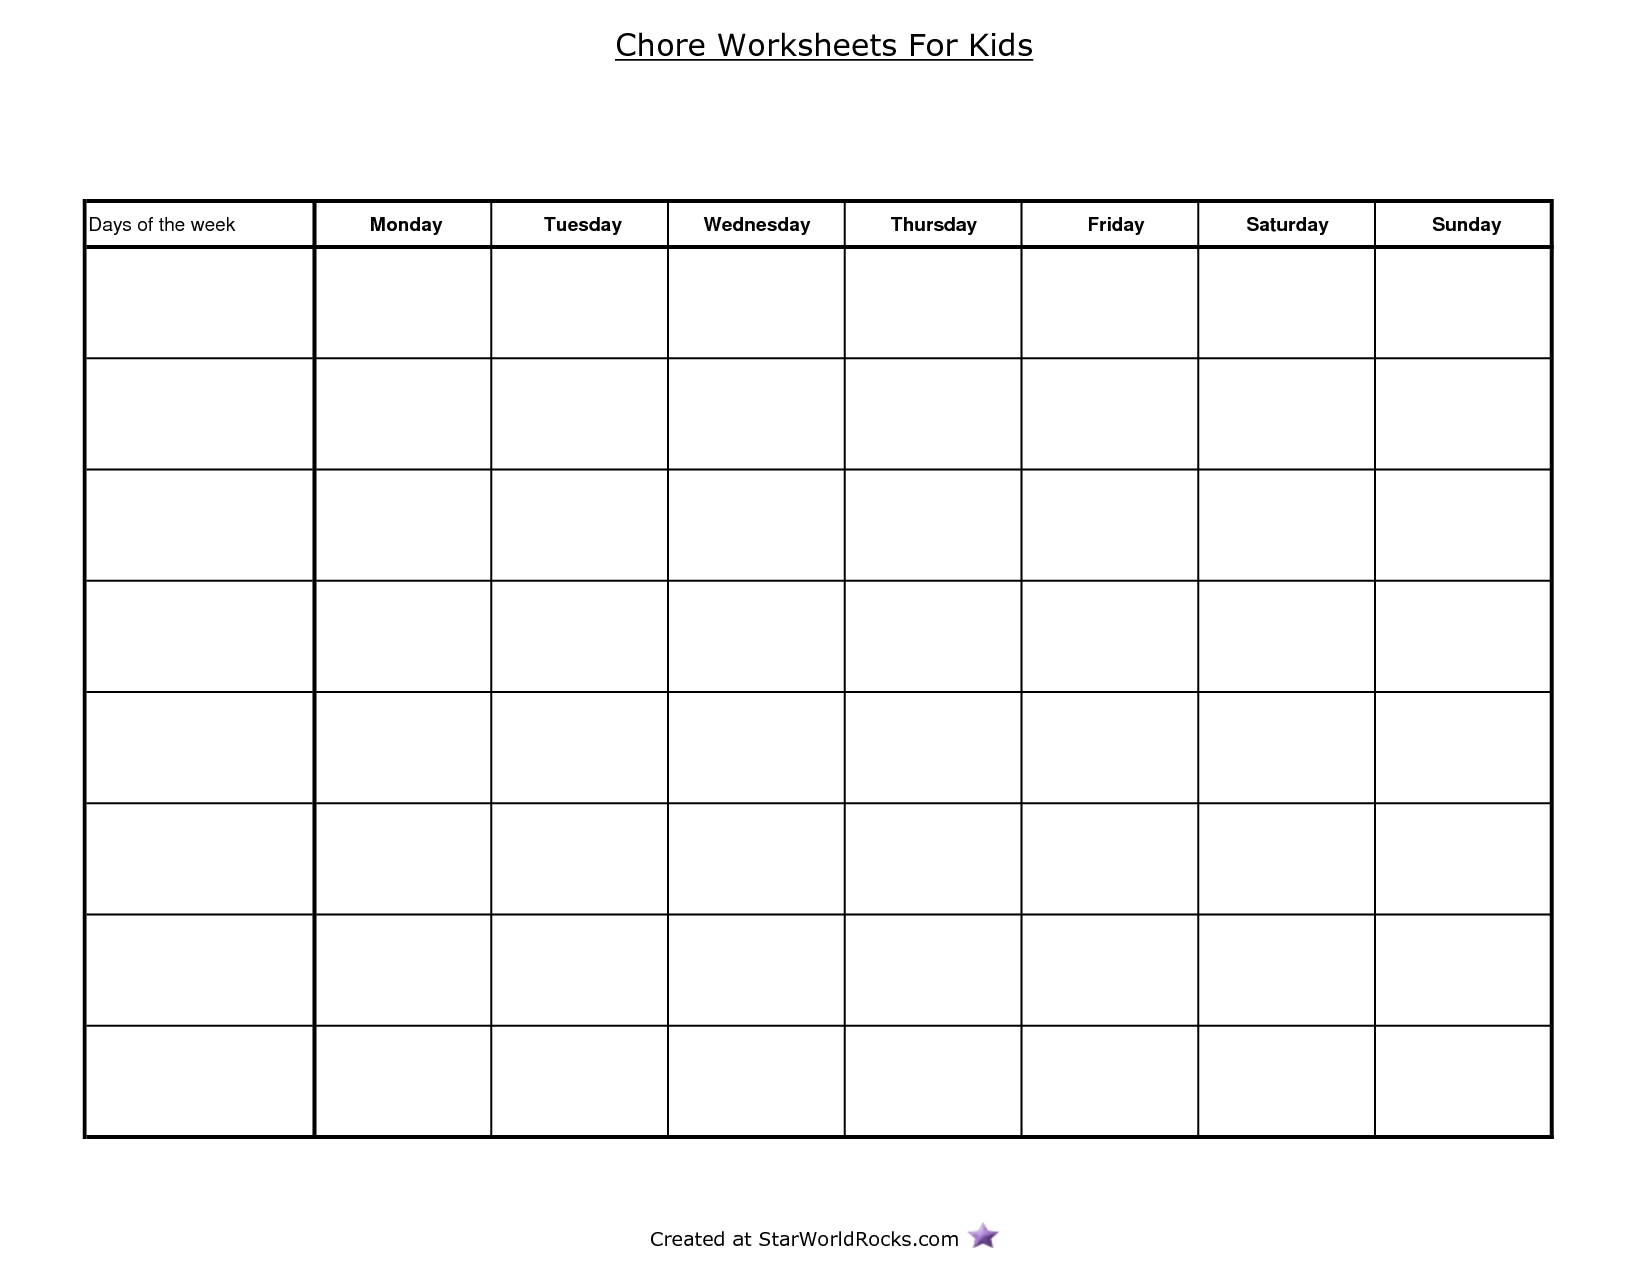 Blank Charts To Print | Writings And Essays Corner-Free Blank Charts To Print